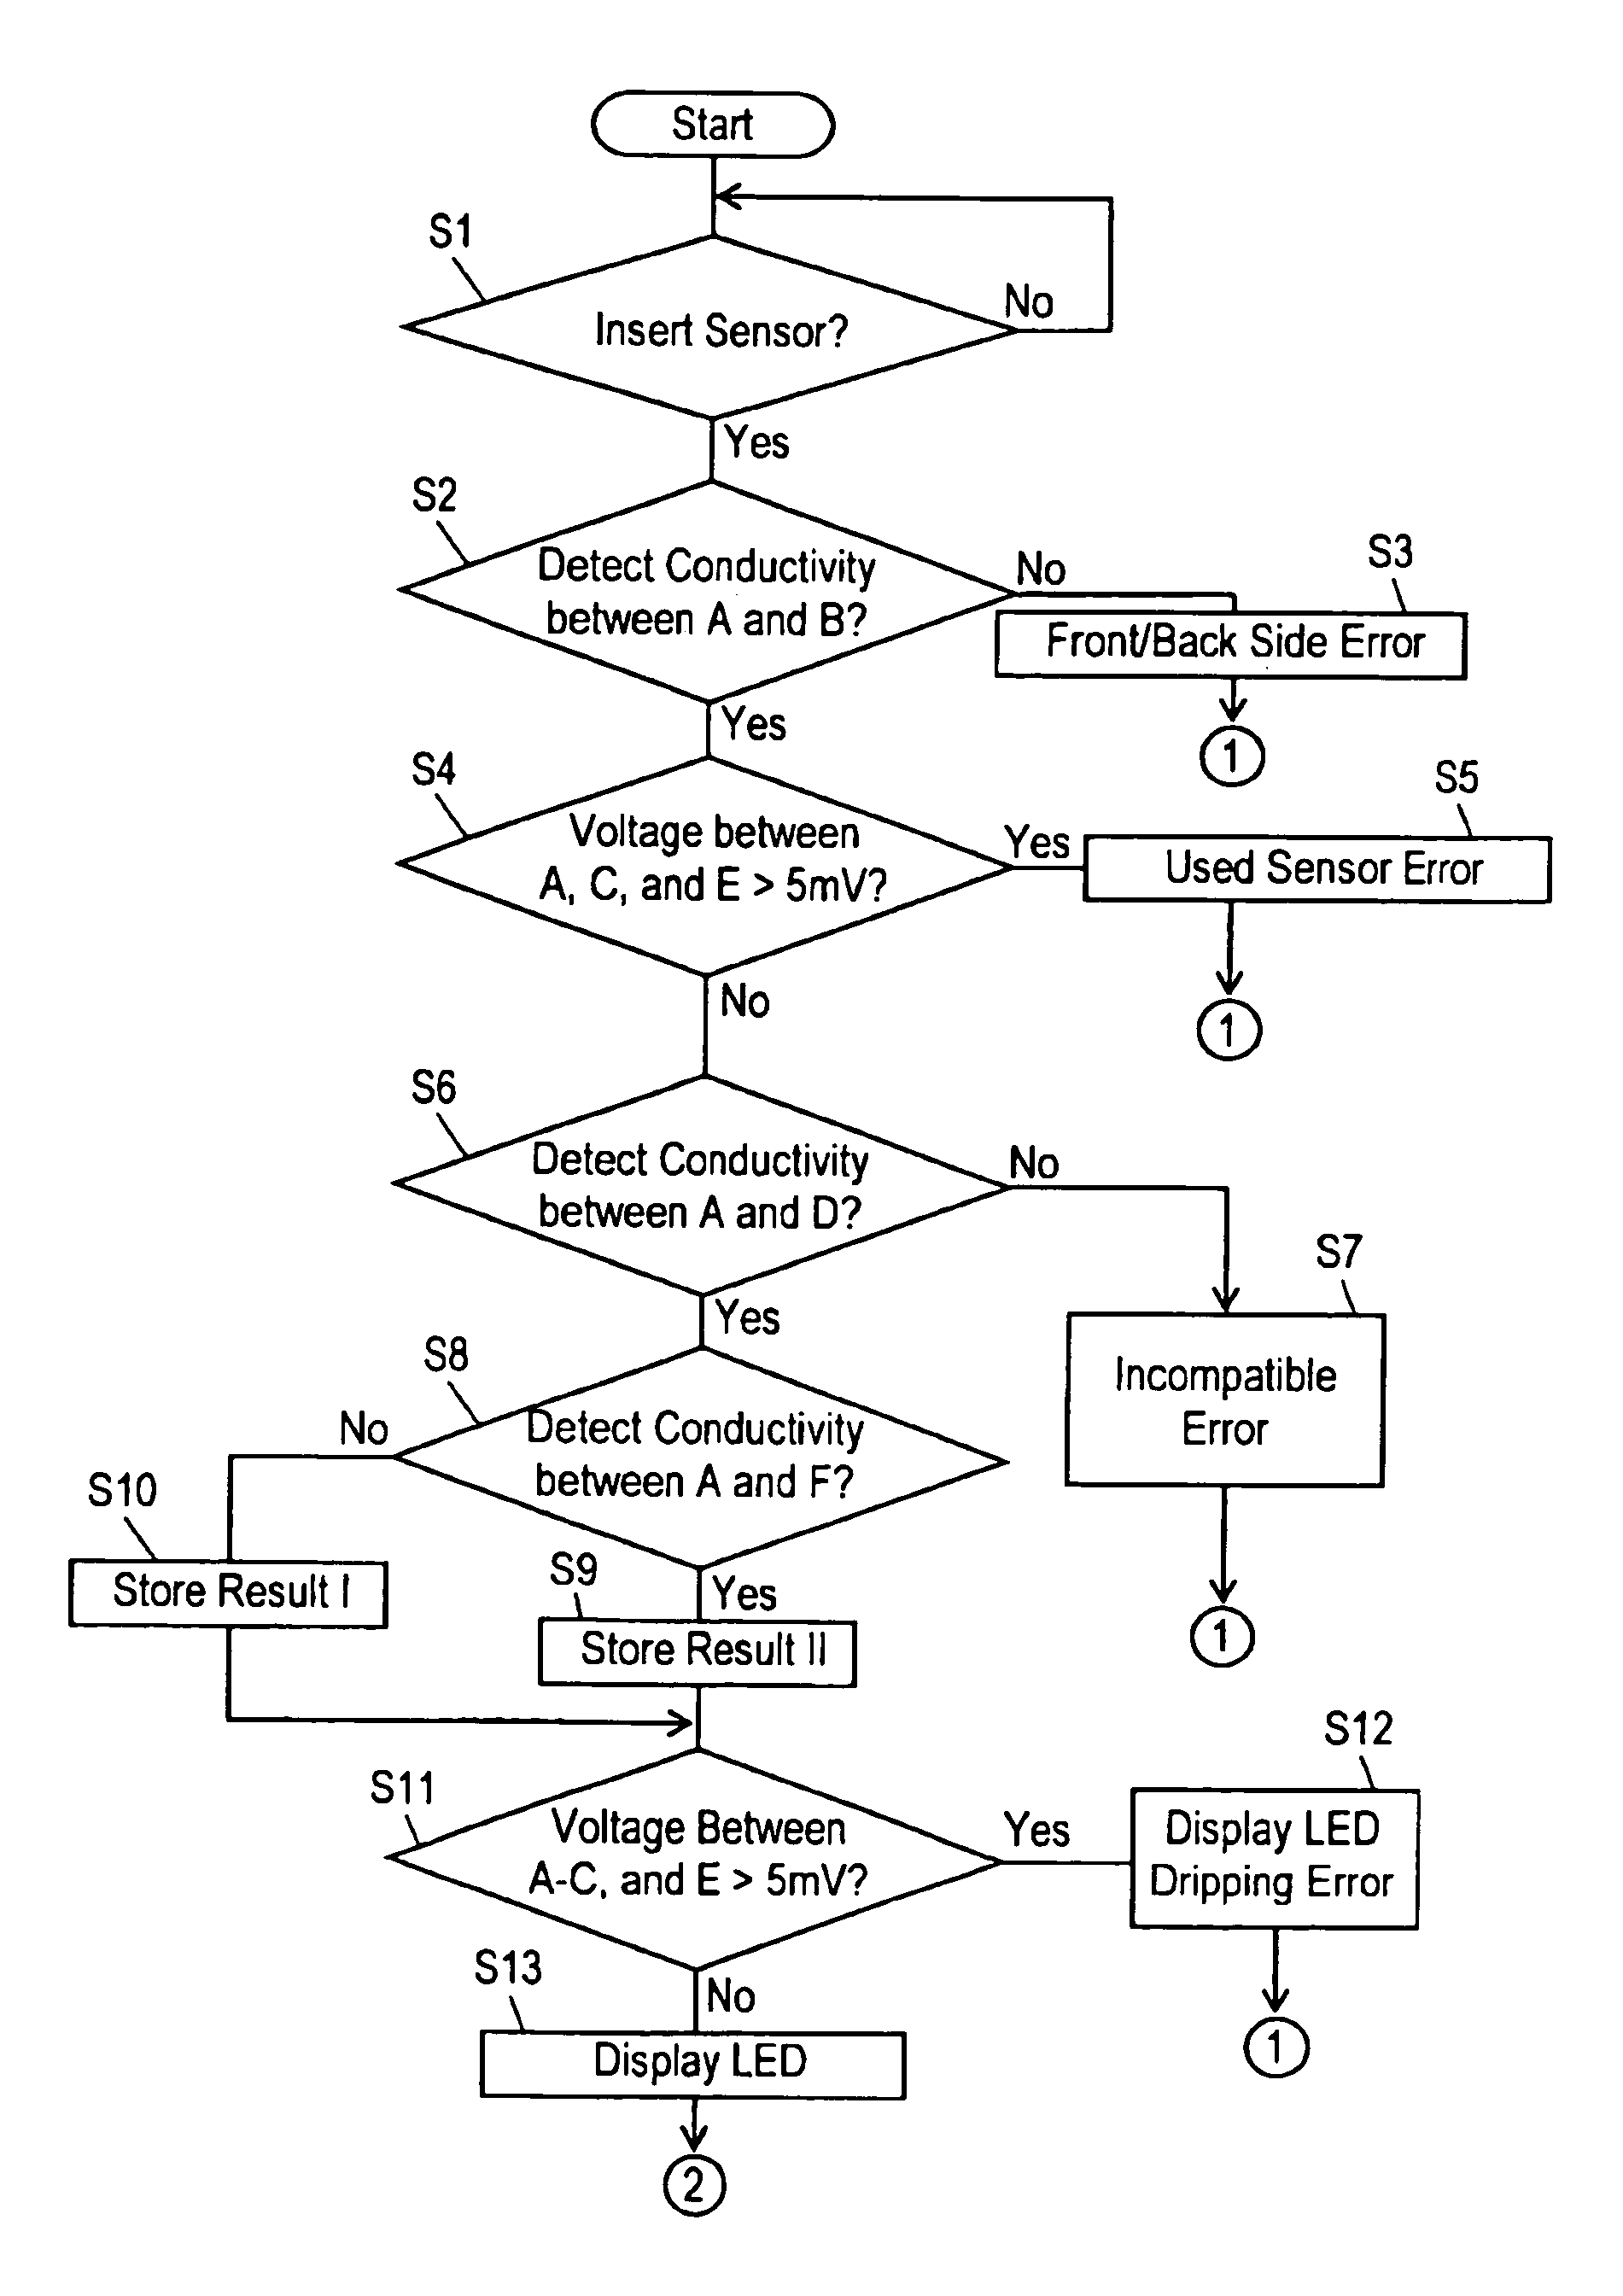 Biosensor, measuring instrument for biosensor, and method of quantifying substrate